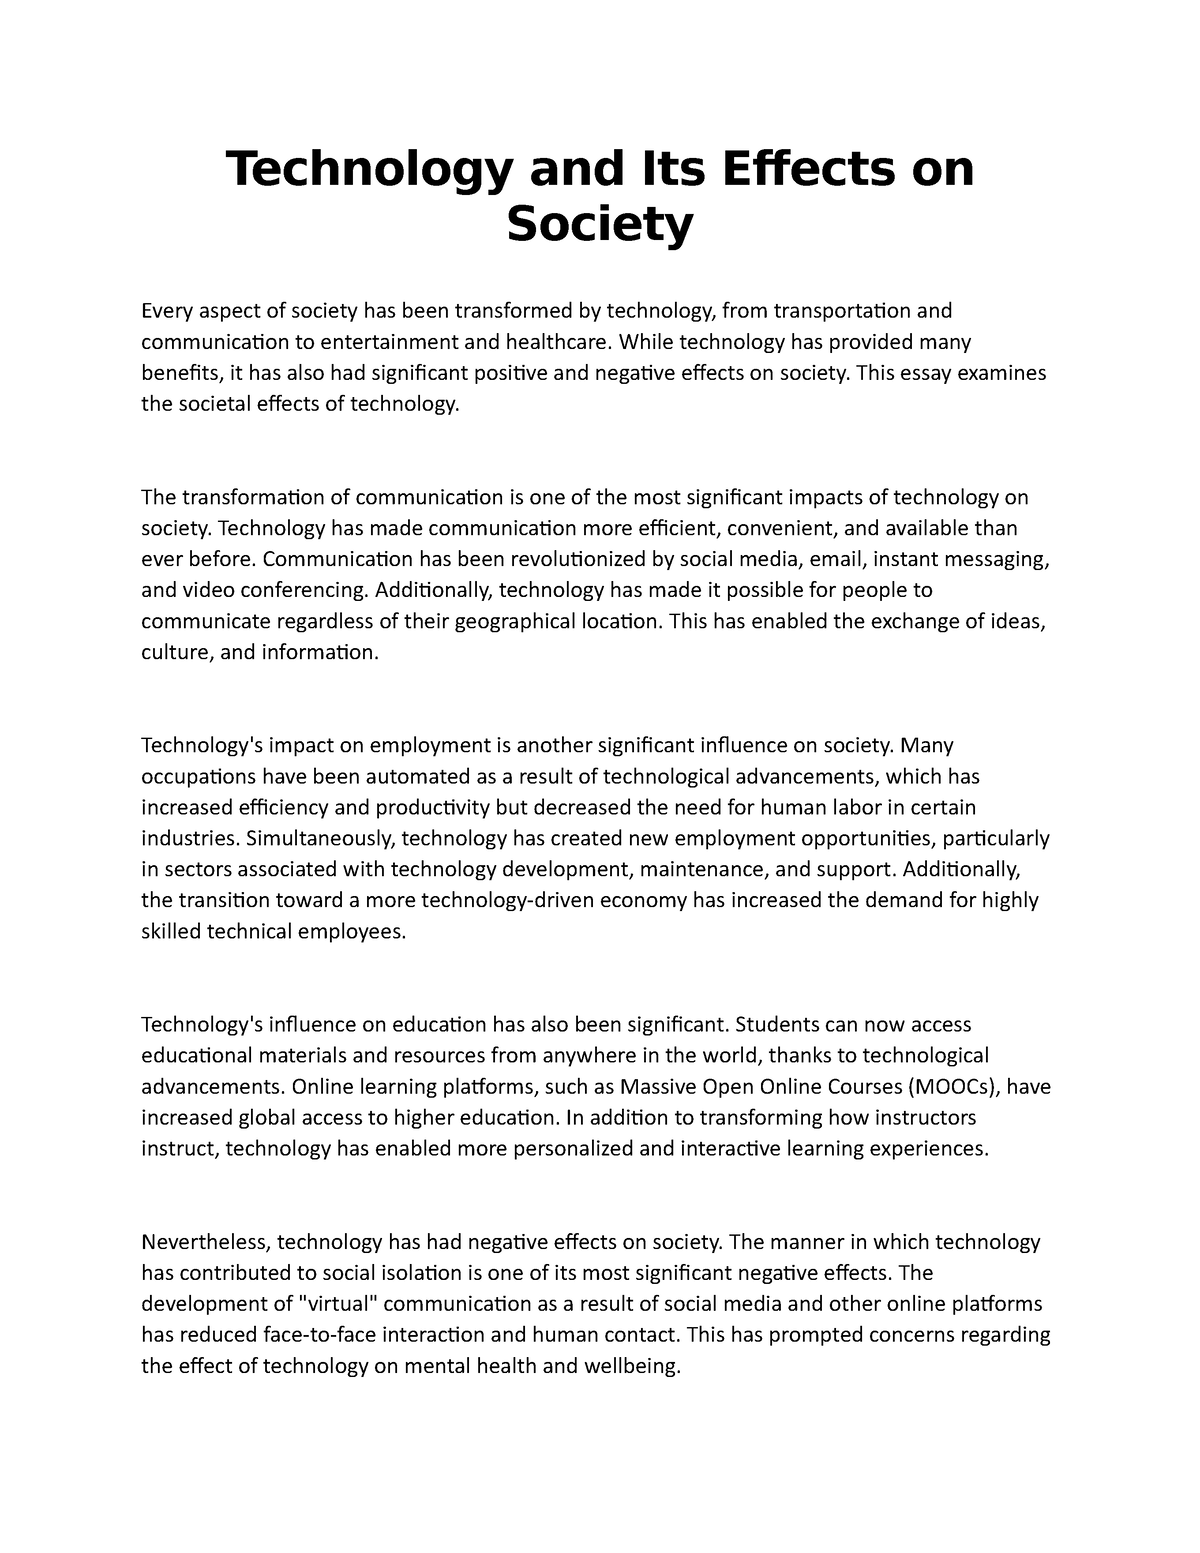 effects of technology on society essay